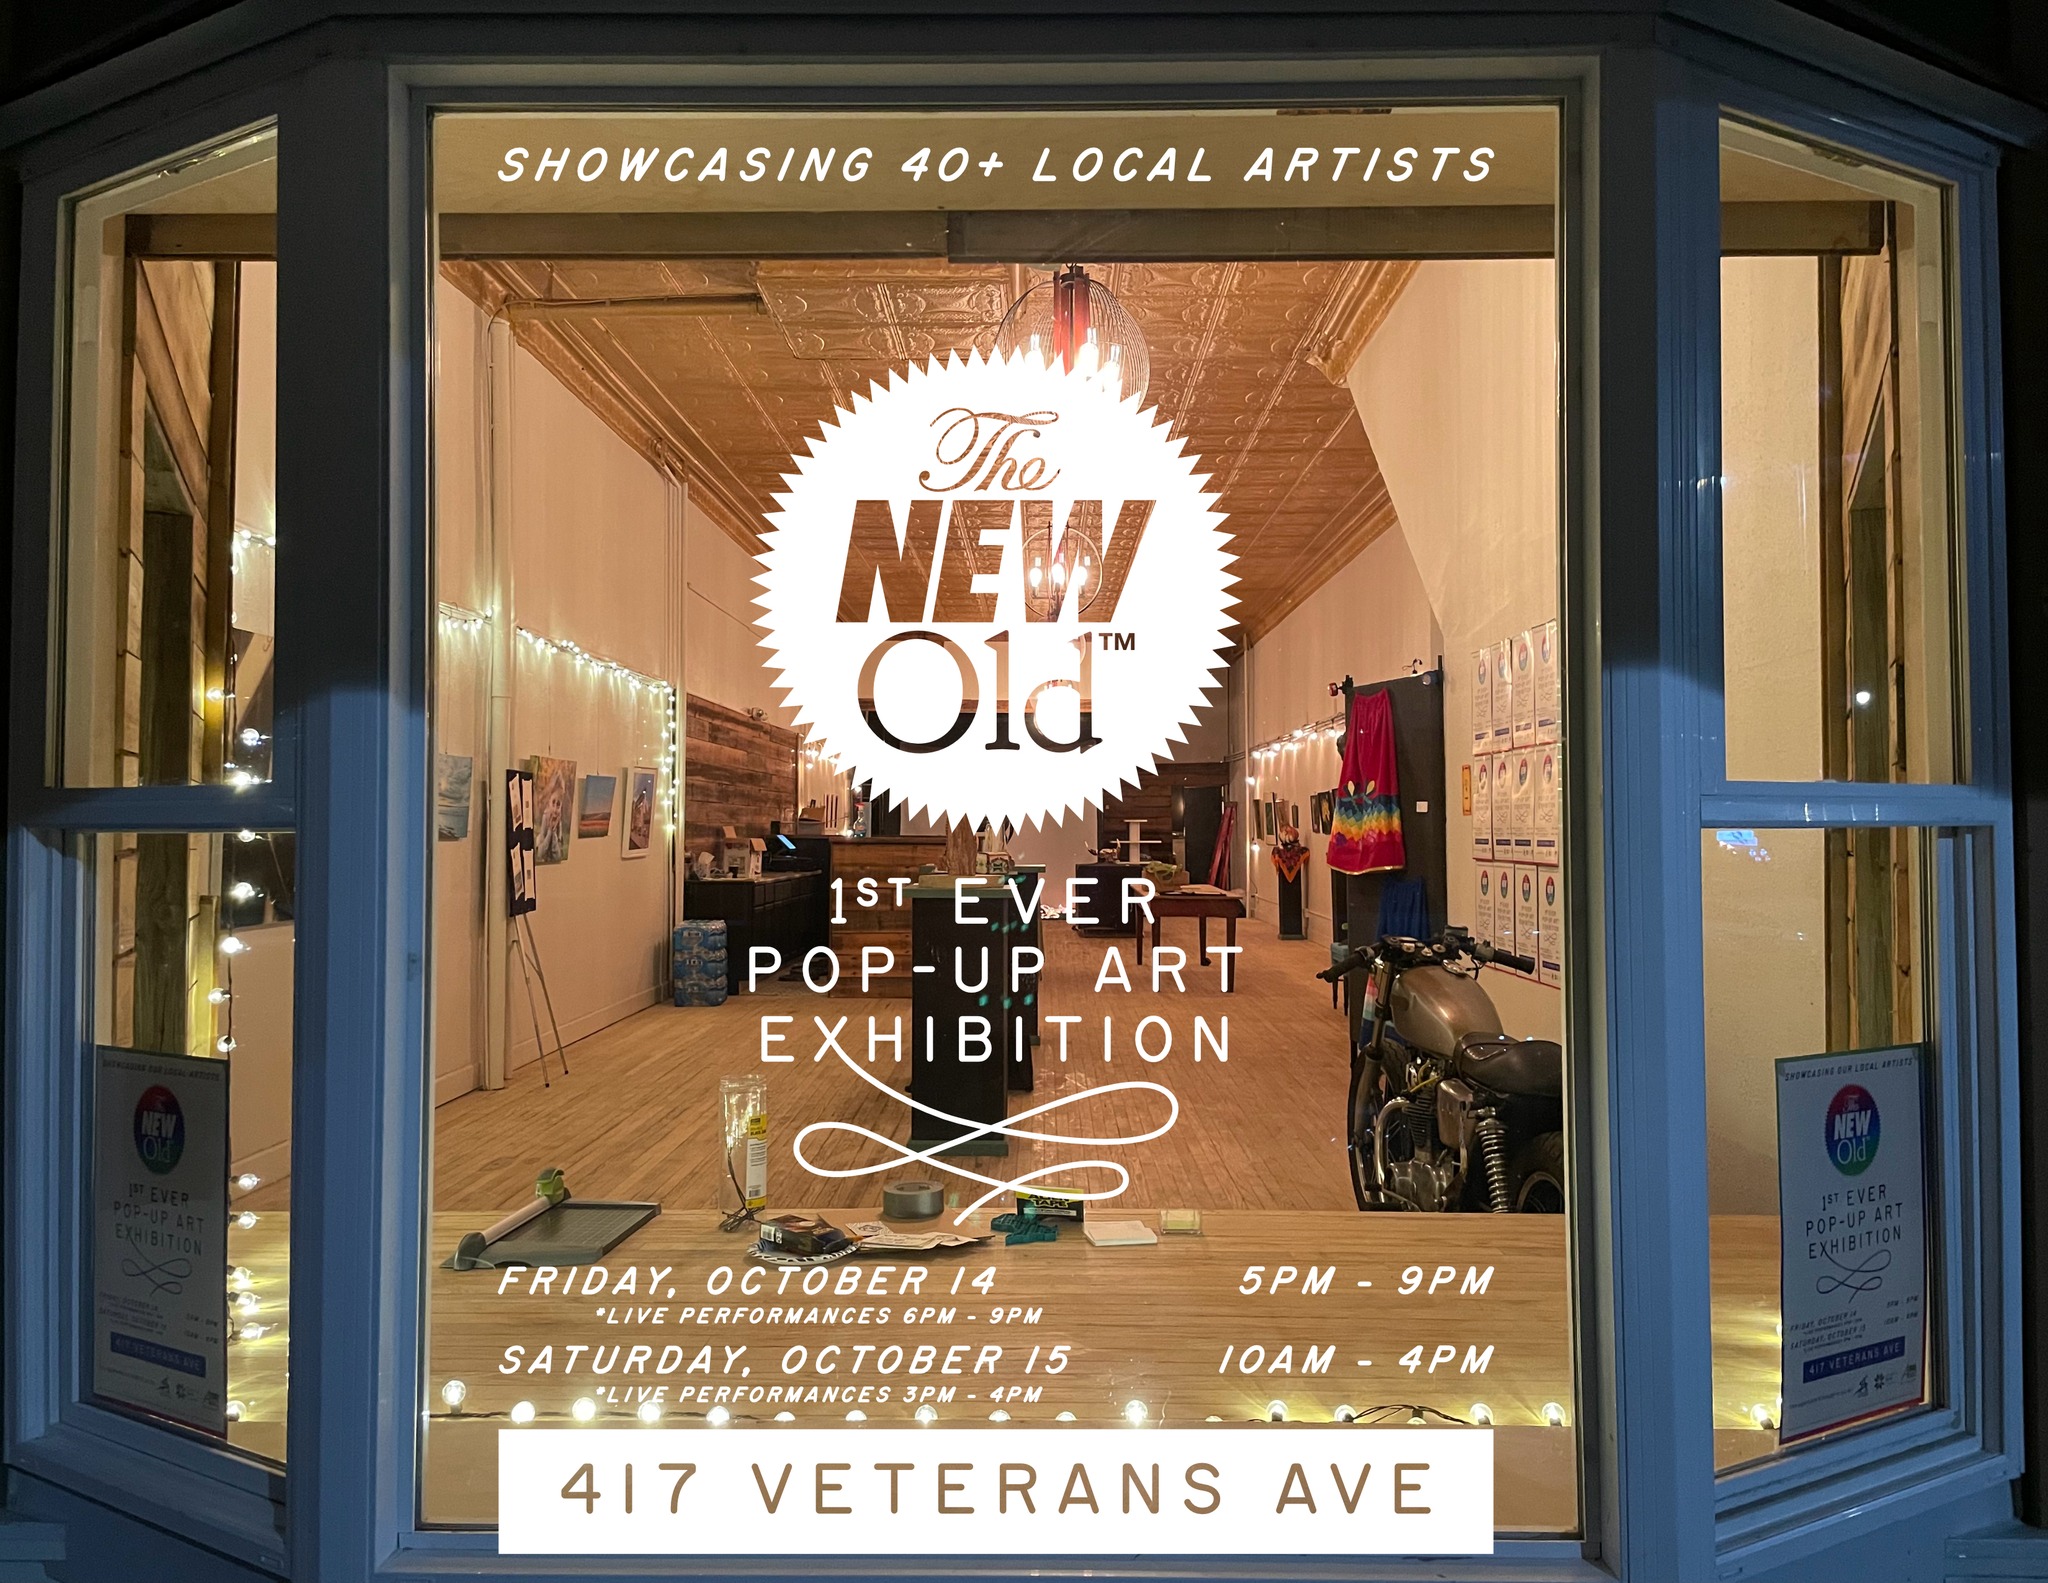 A window display reads "The New Old, Showcasing 40+ local artists, 1st ever pop up art exhibition"